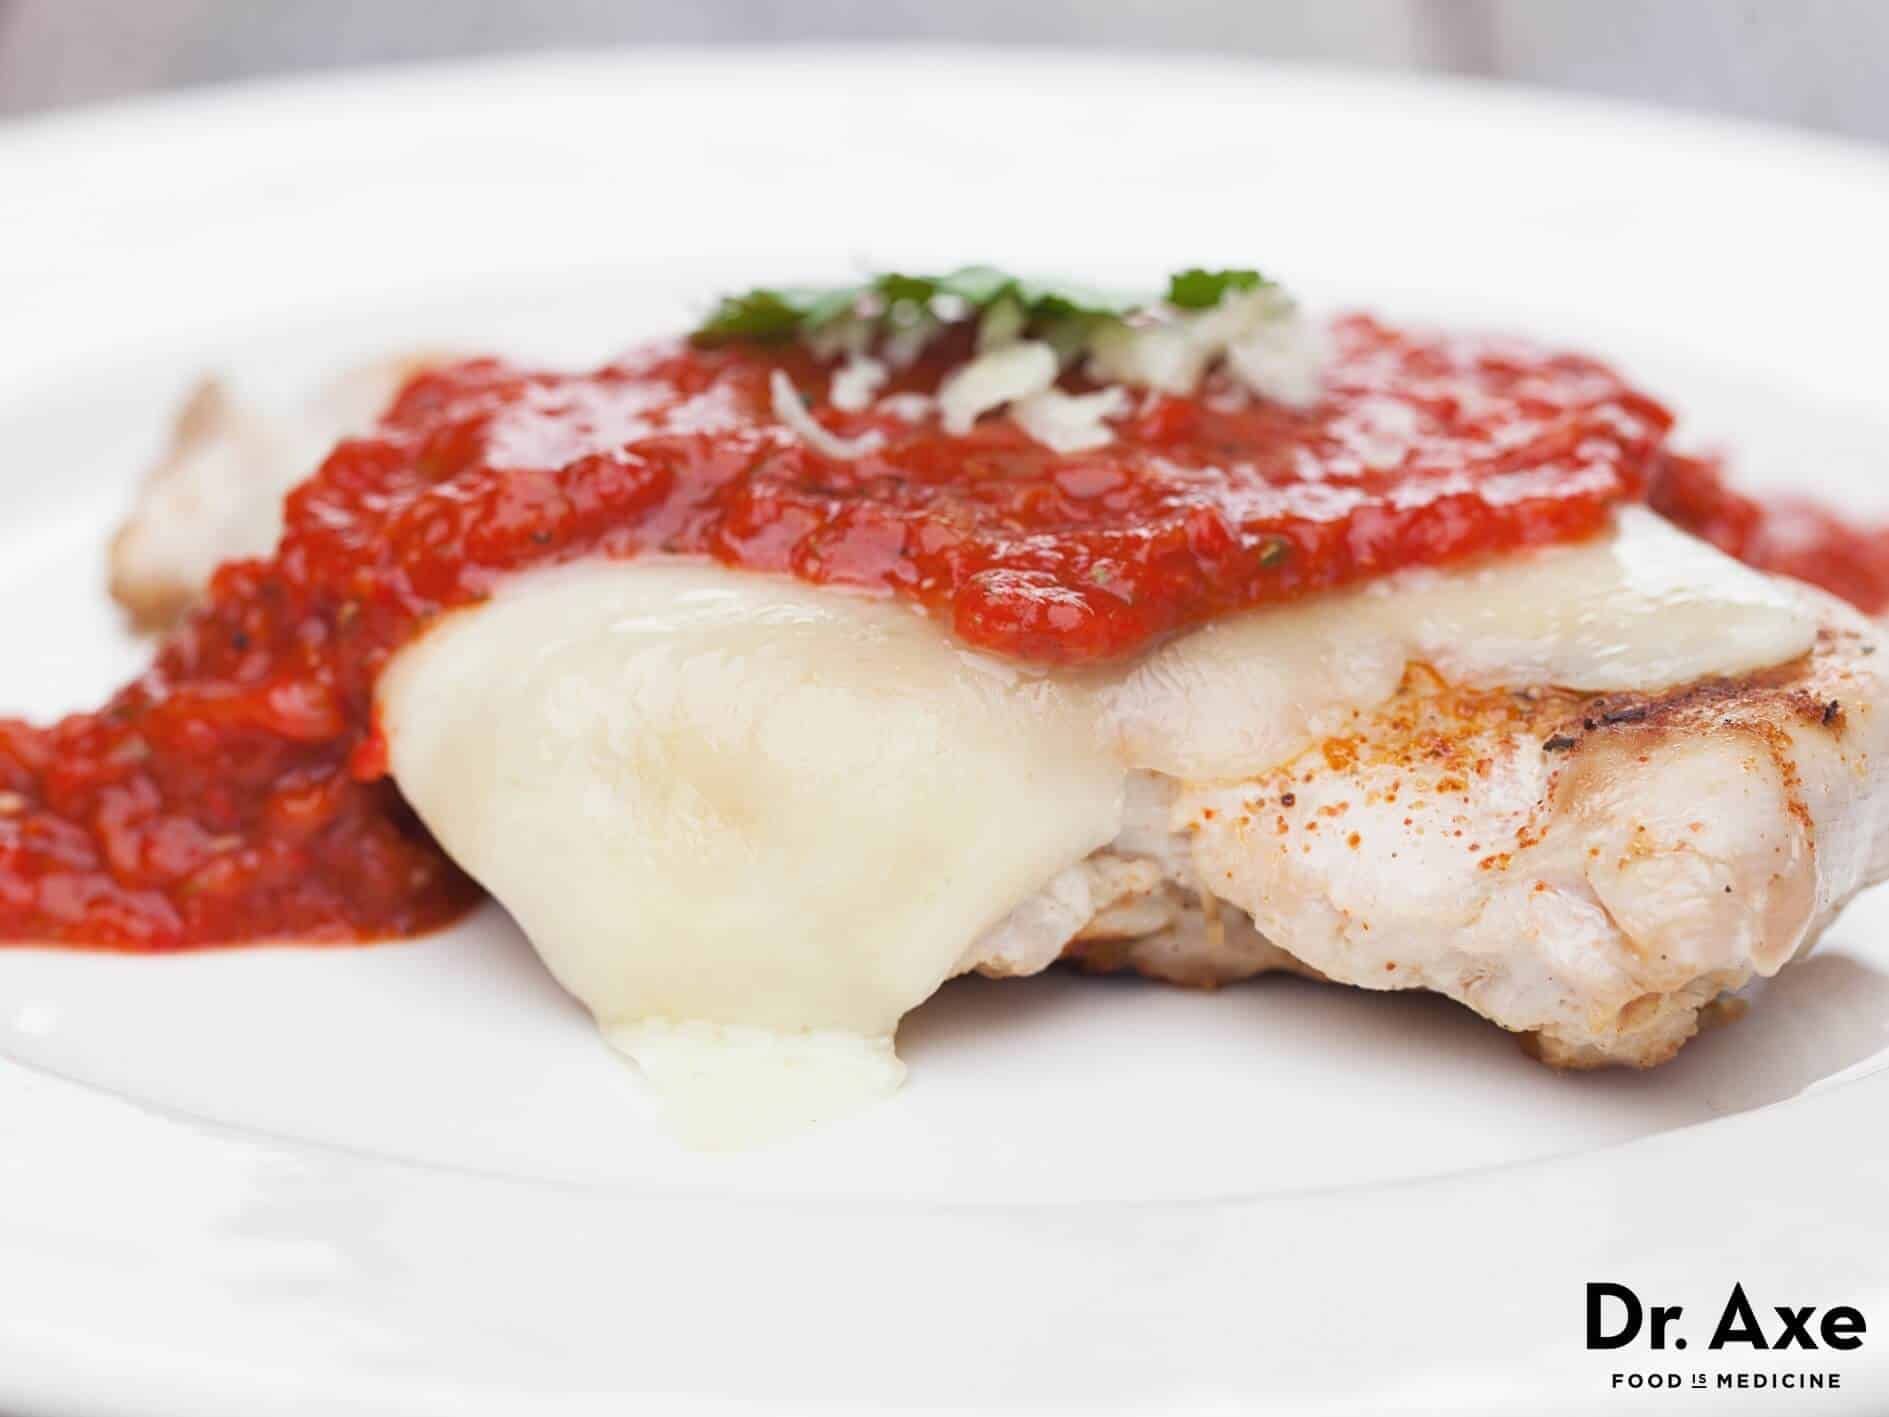 Roasted red pepper sauce with chicken recipe - Dr. Axe